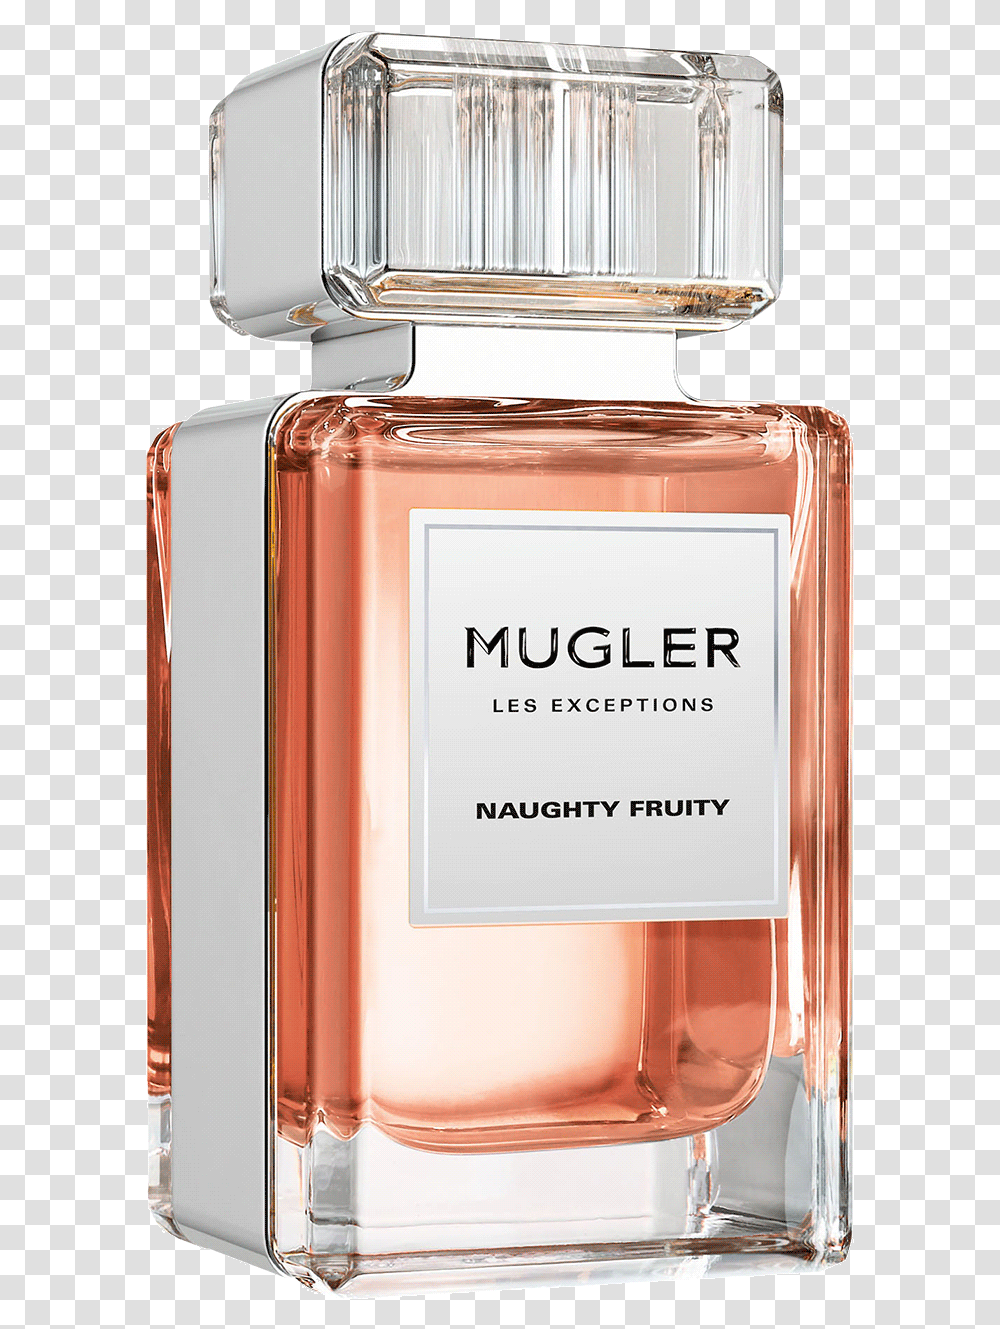 Les Exceptions 11th Naughty Fruity Mugler Parfum, Bottle, Perfume, Cosmetics, Refrigerator Transparent Png